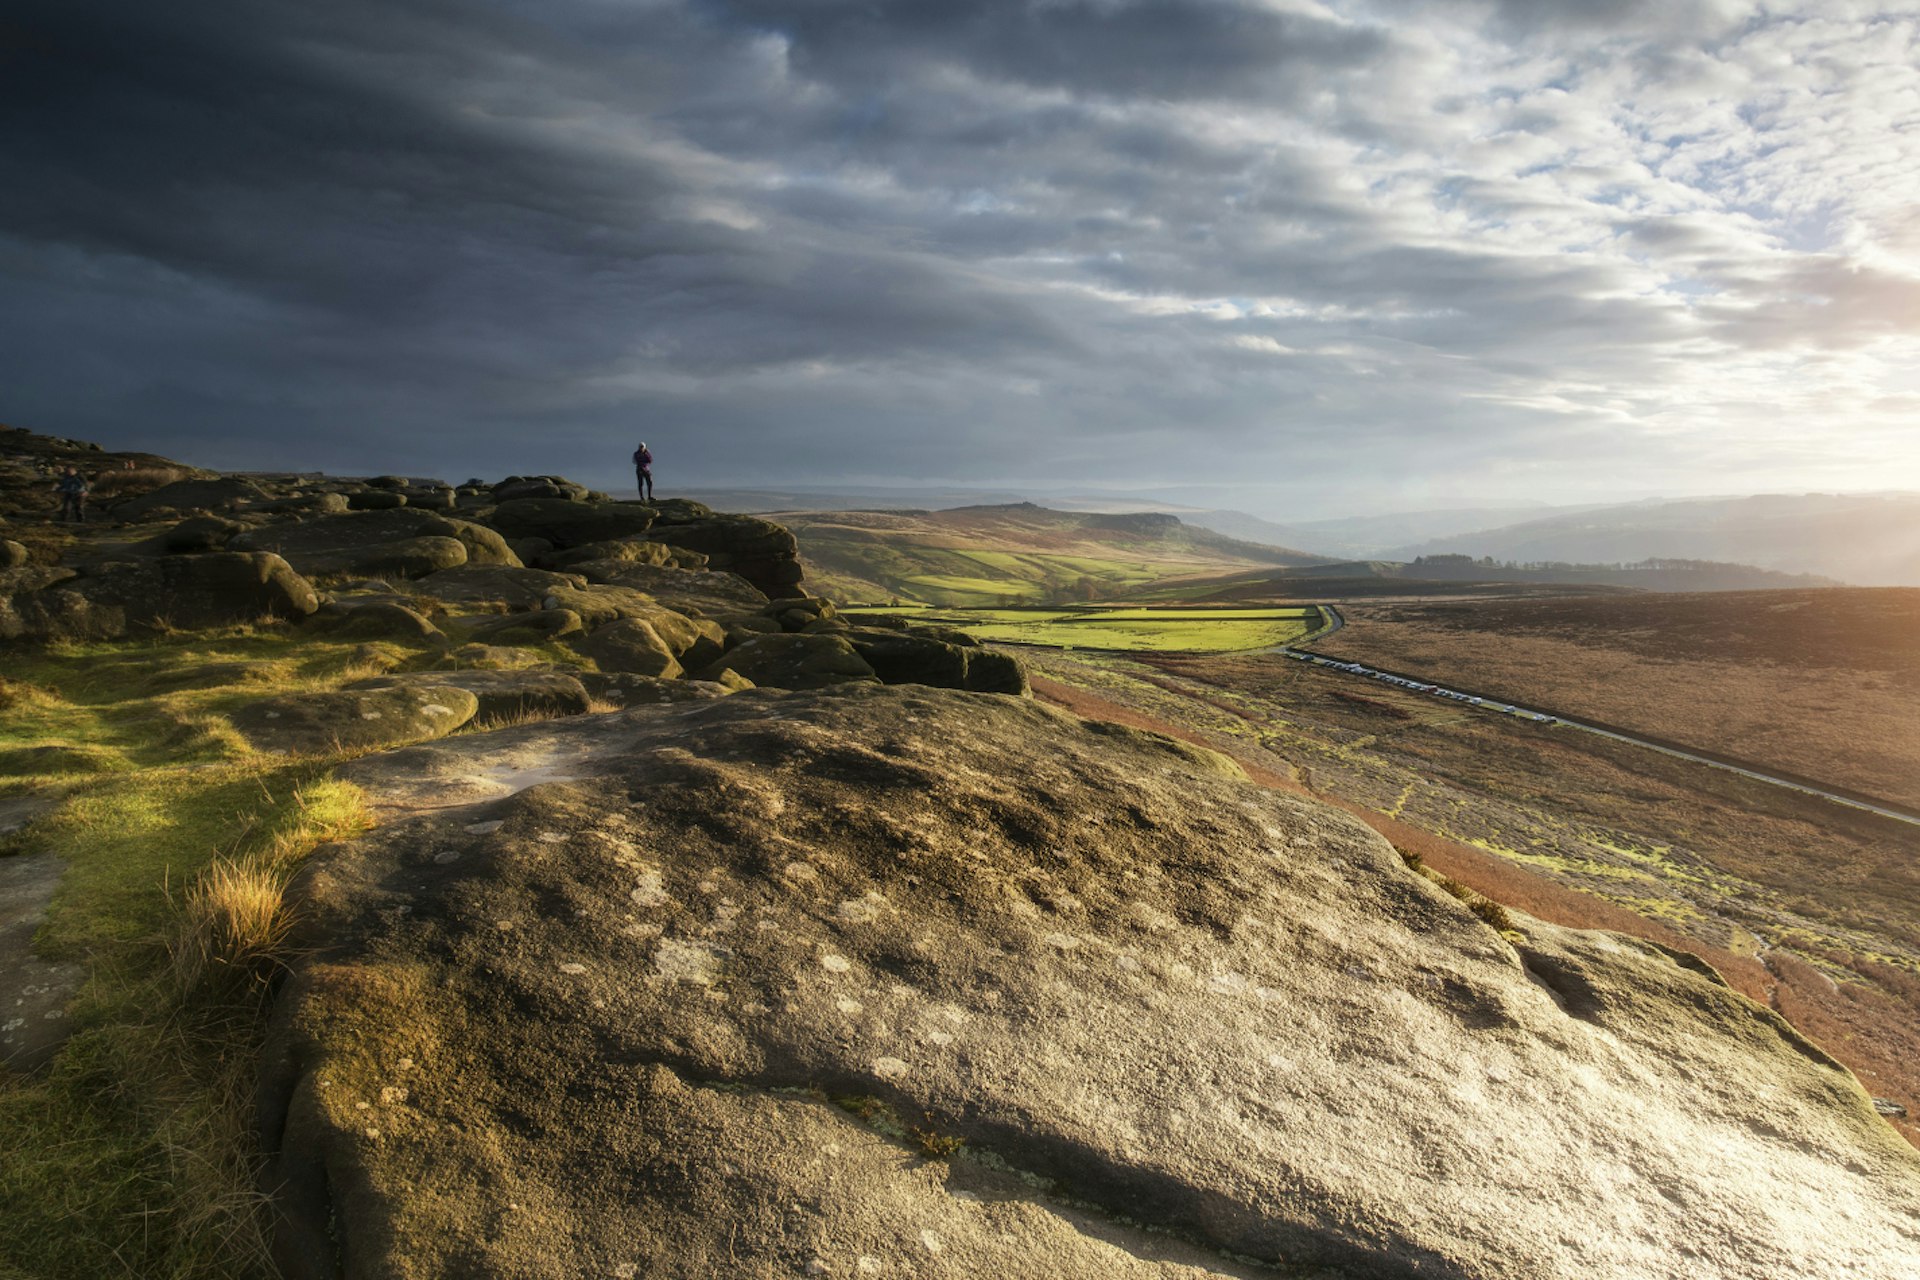 The Peak District. Image by Getty / Loop Images / Universal Image Group